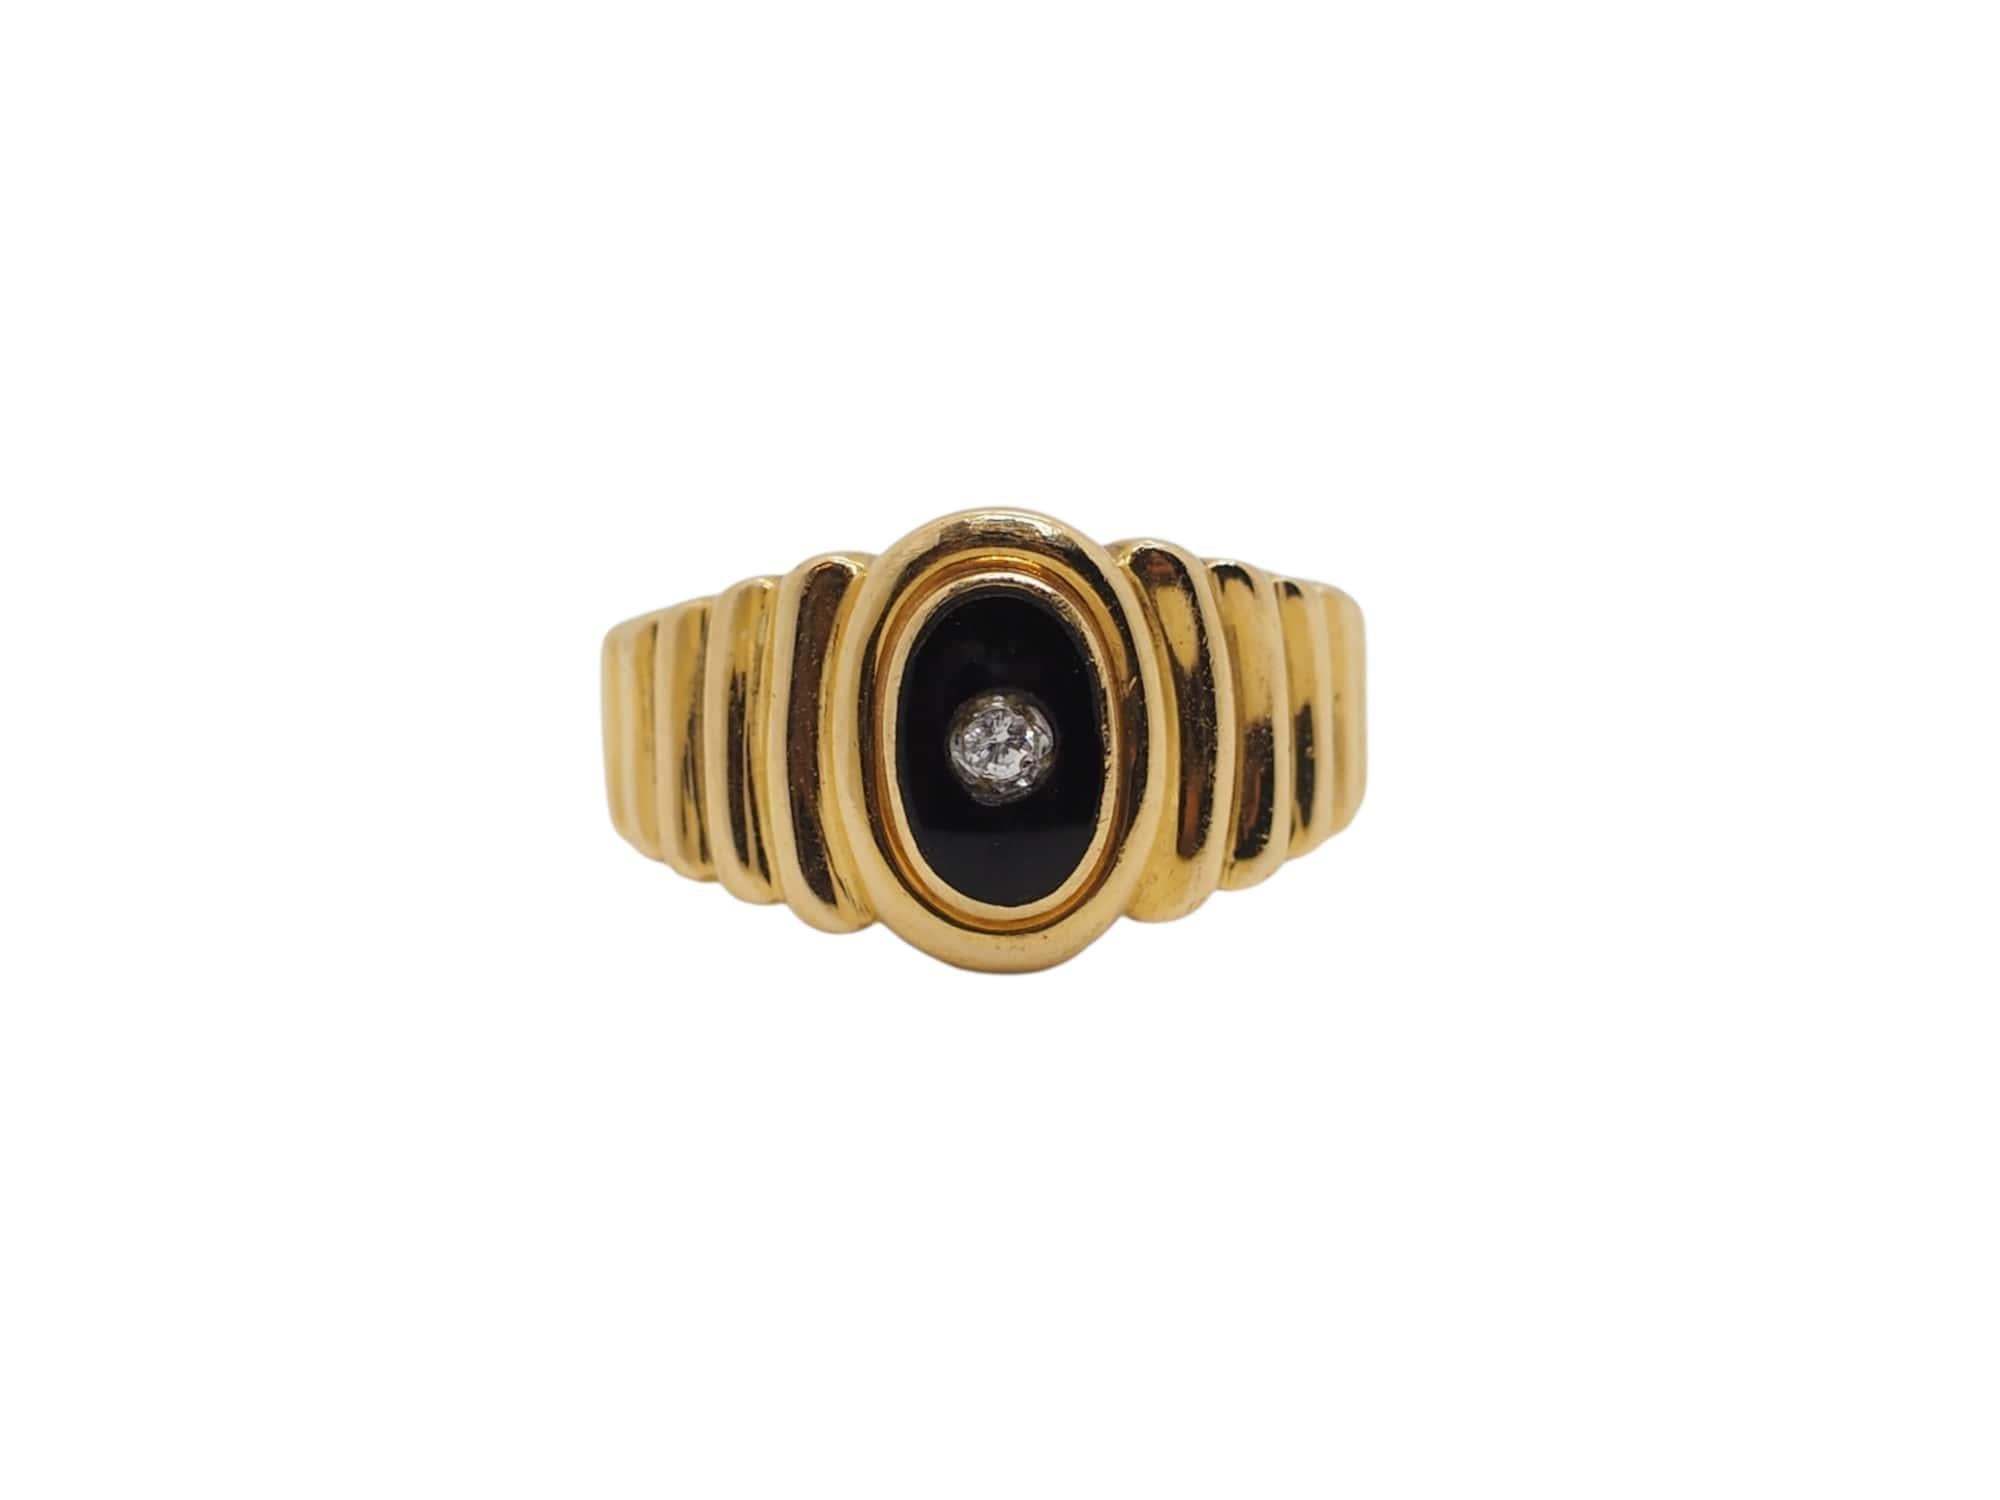 Embrace timeless elegance with our classic stone ring, meticulously crafted in lustrous 18k yellow gold and adorned with a captivating onyx stone and a sparkling diamond totaling approximately 0.03 carats. With a total weight of about 4.7 grams and